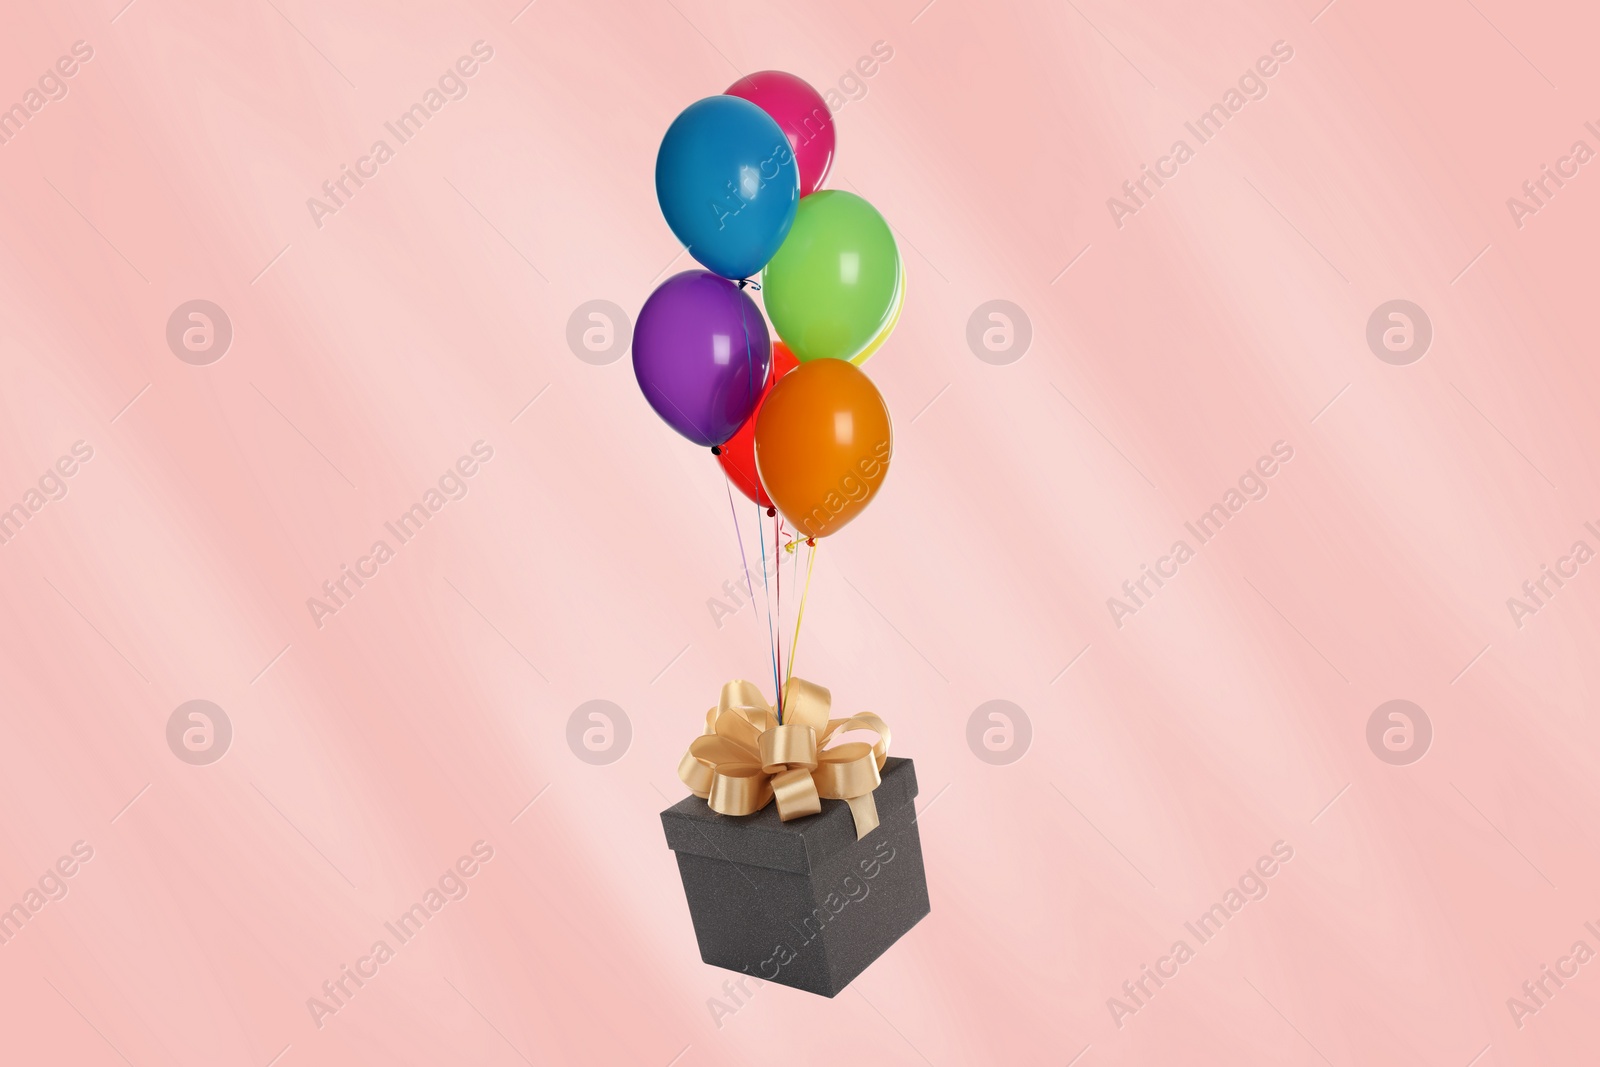 Image of Many balloons tied to gift box on pink background